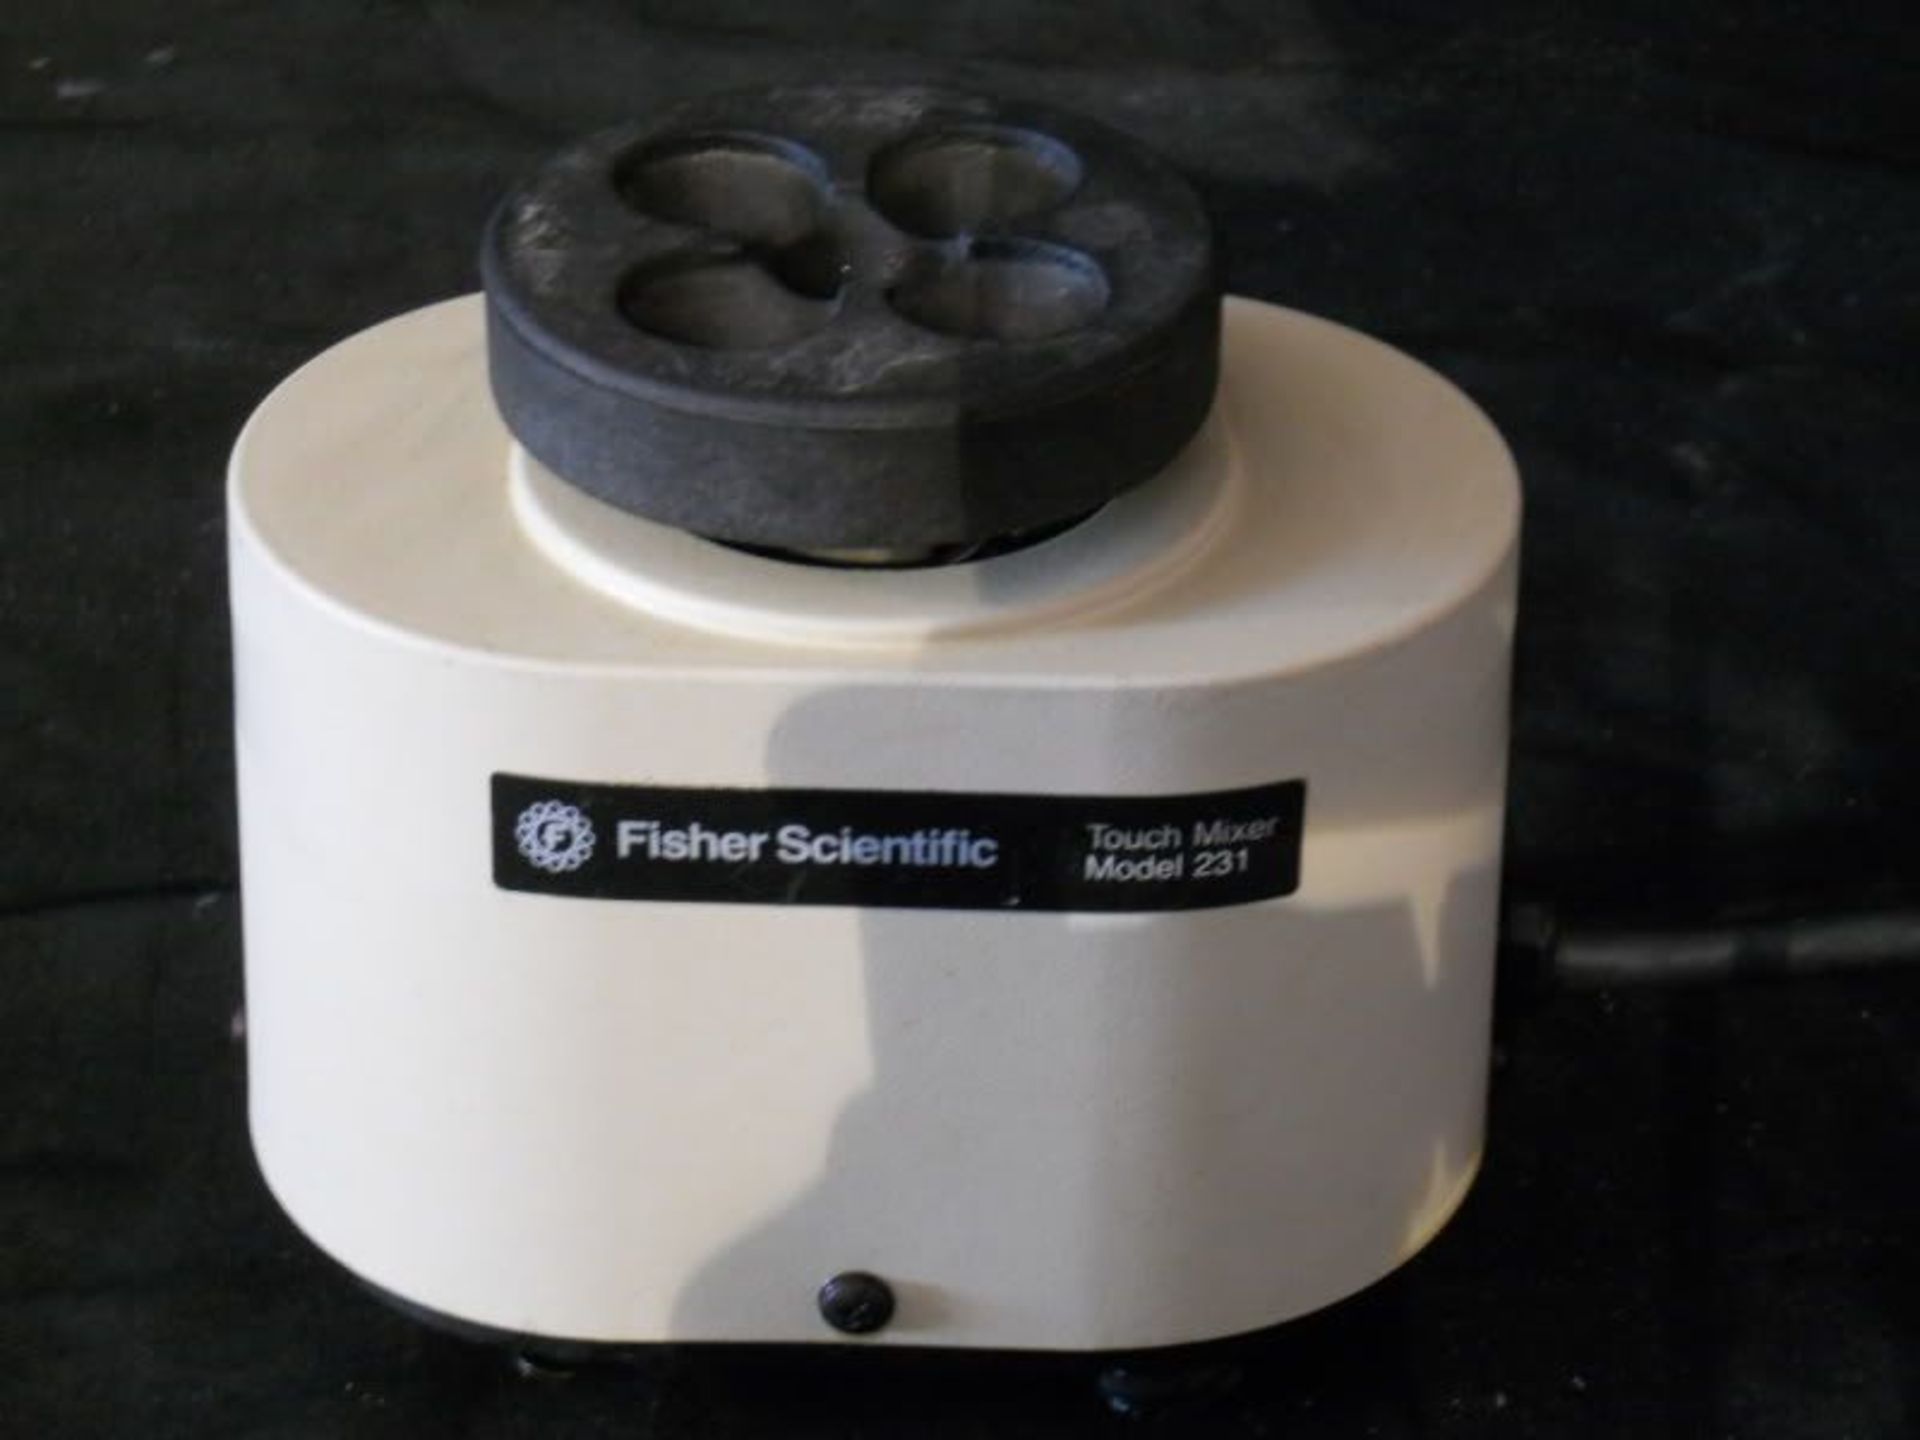 Fisher Scientific Touch Mixer Model 231, Qty 2, 330820030004 - Image 4 of 6